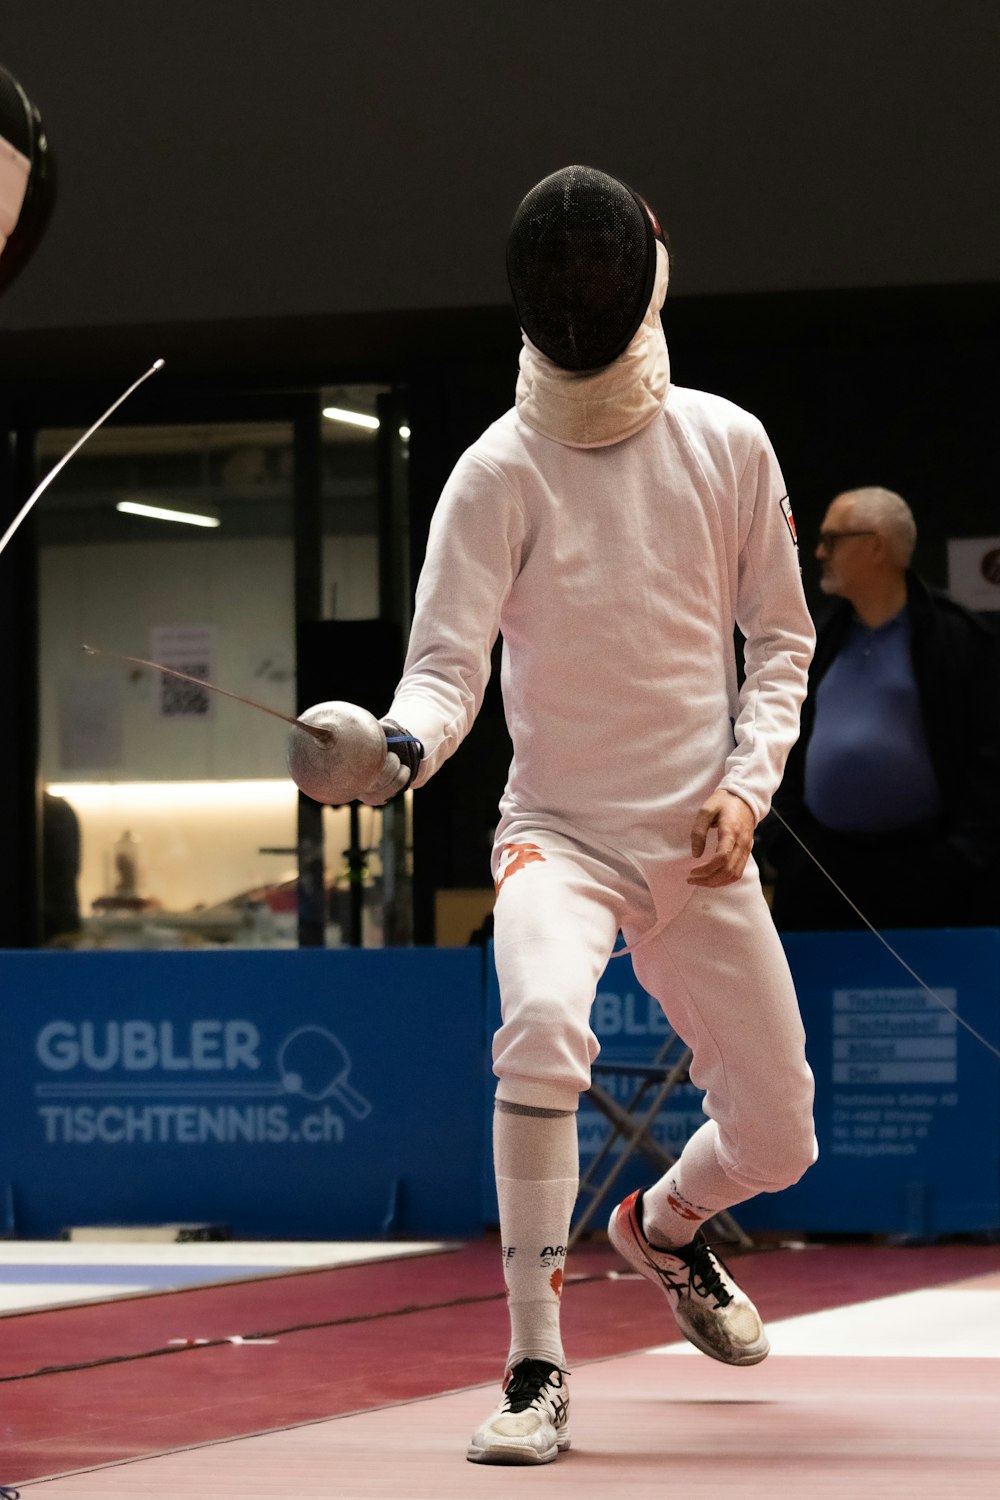 a man in a fencing outfit is practicing his moves